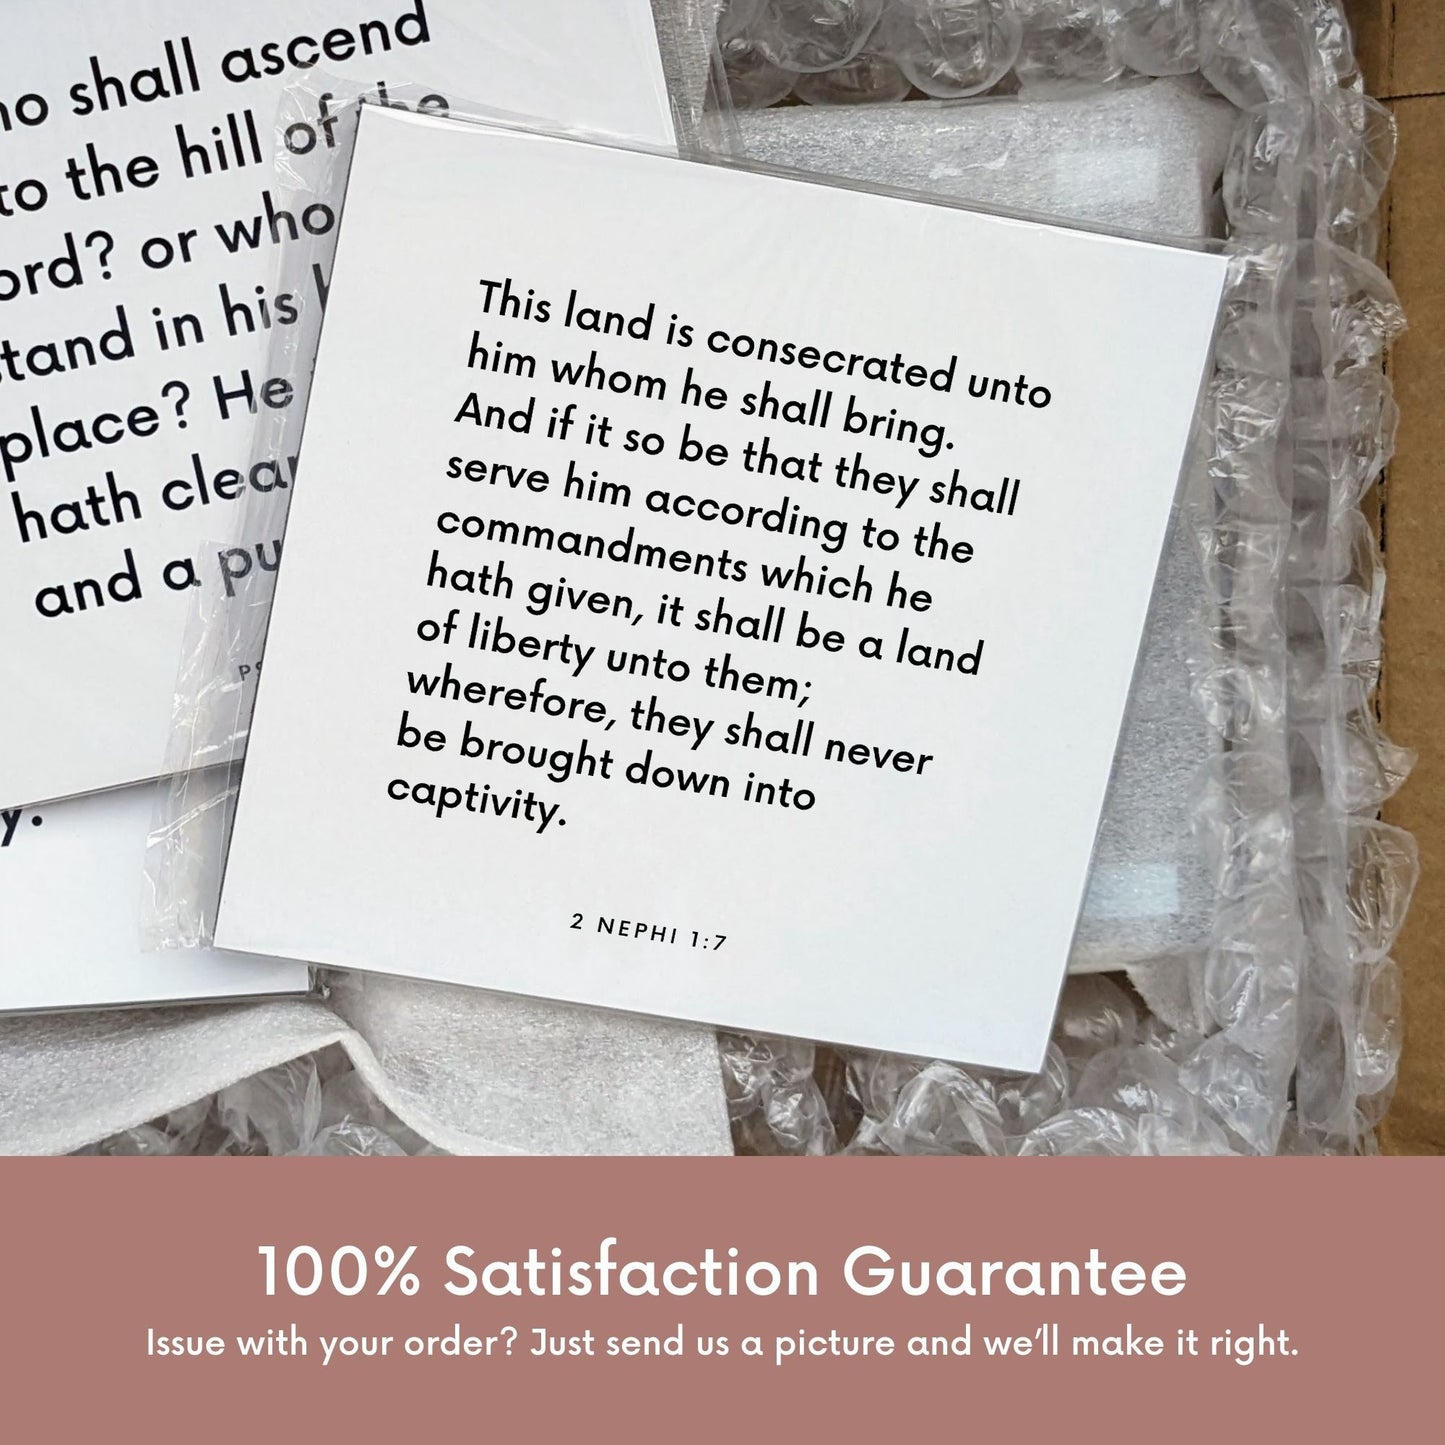 Shipping materials for scripture tile of 2 Nephi 1:7 - "This land is consecrated unto him whom he shall bring"